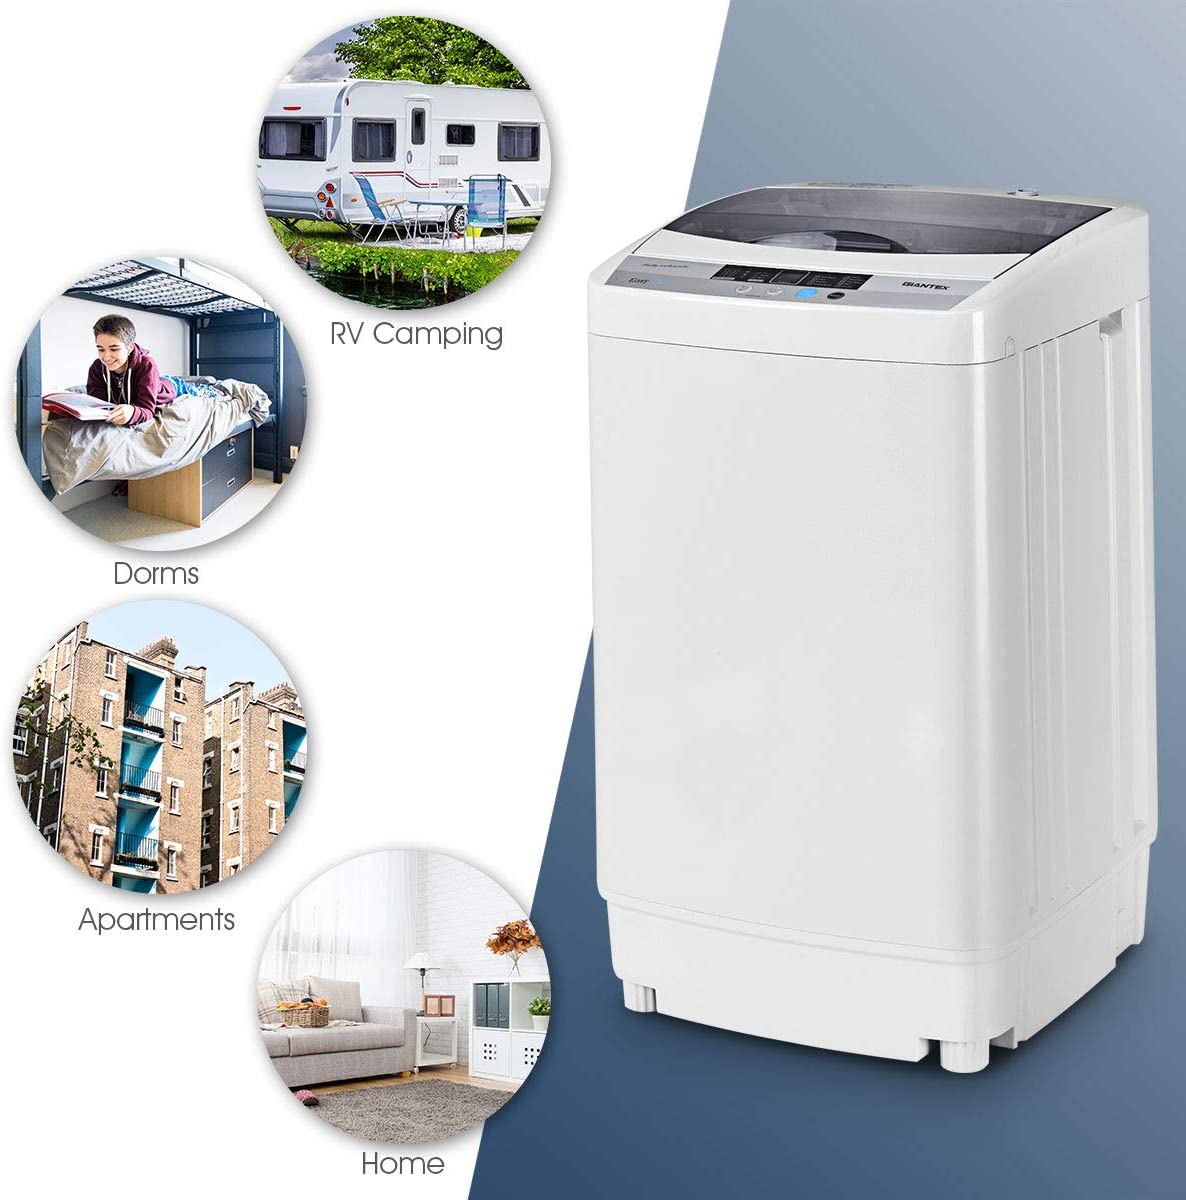 Giantex Full-Automatic Washing Machine Portable Compact 1.34 Cu.Ft Laundry Washer Spin with Drain Pump